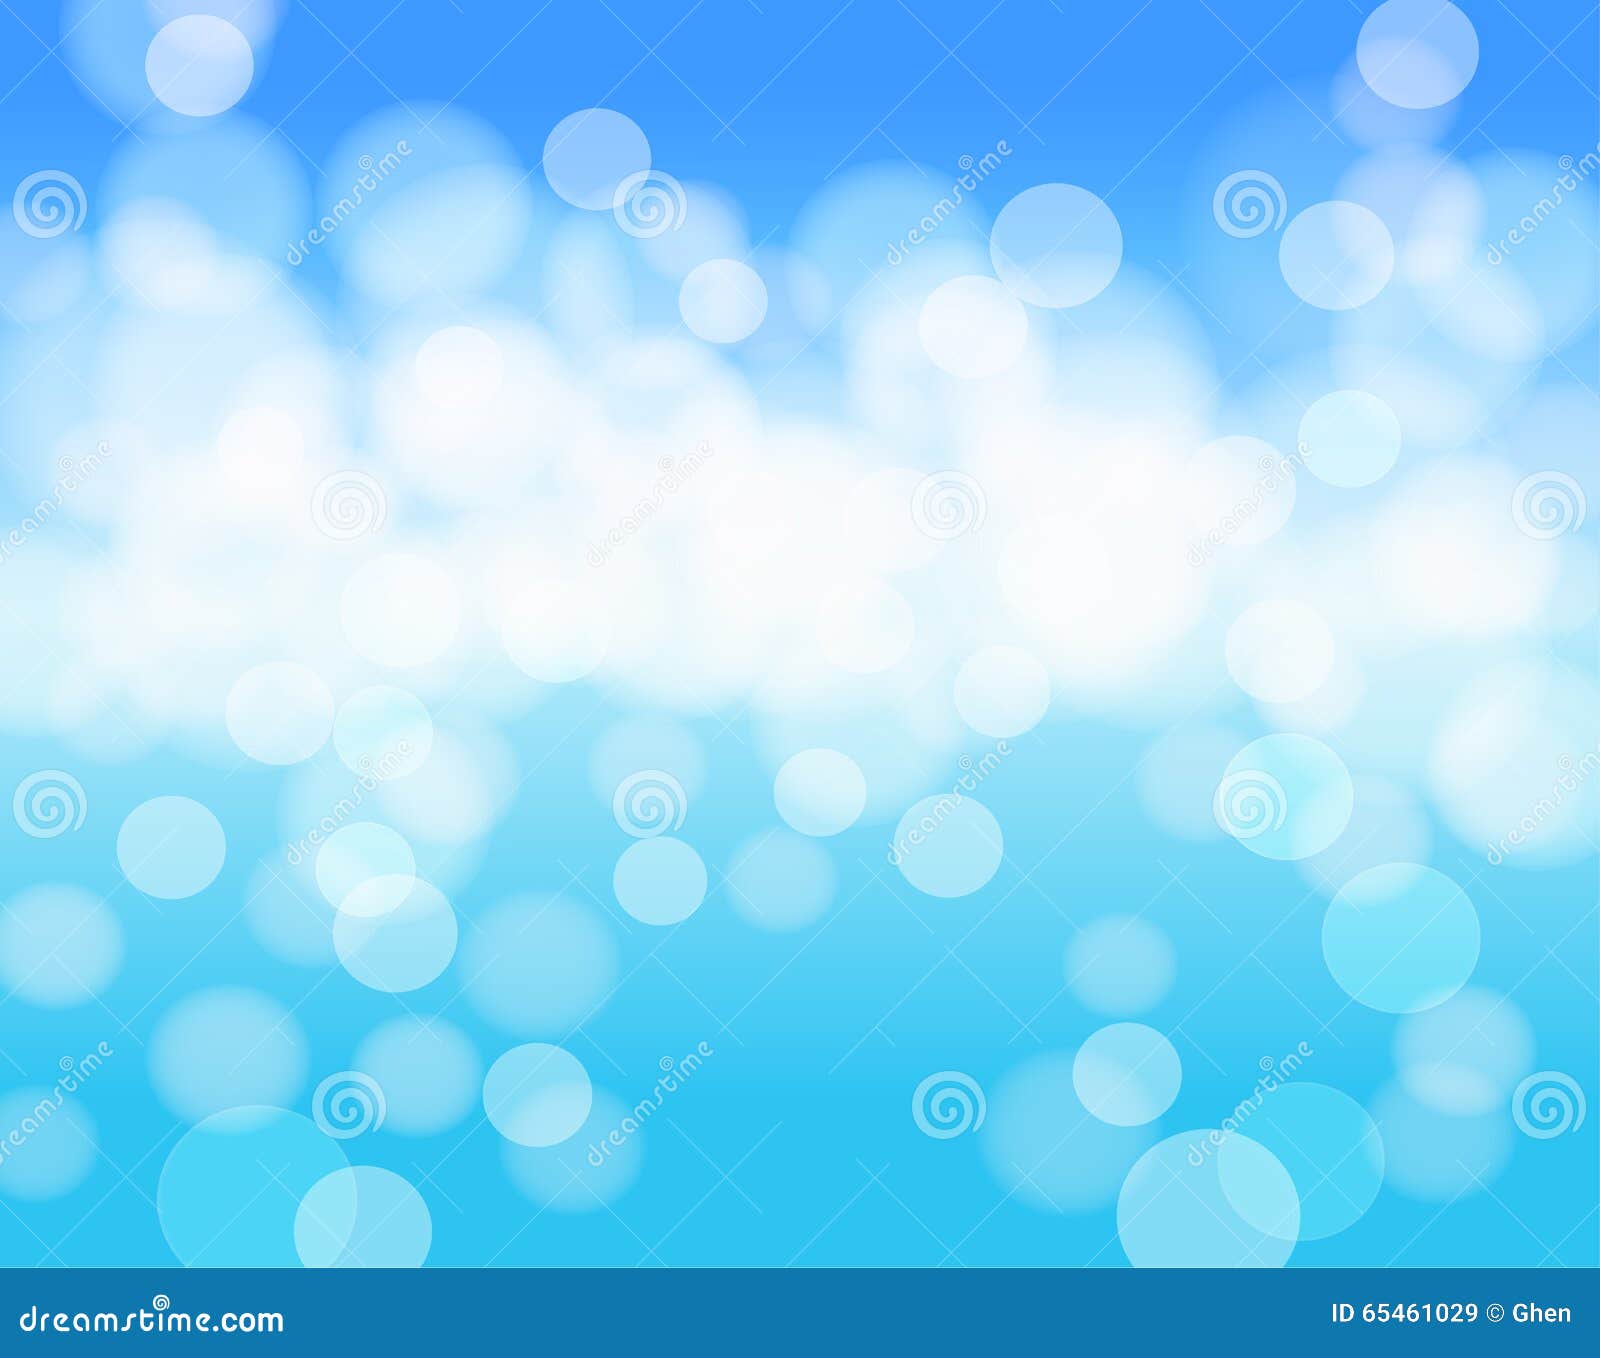 Sky Blue Abstract Background Stock Vector - Illustration of bokeh